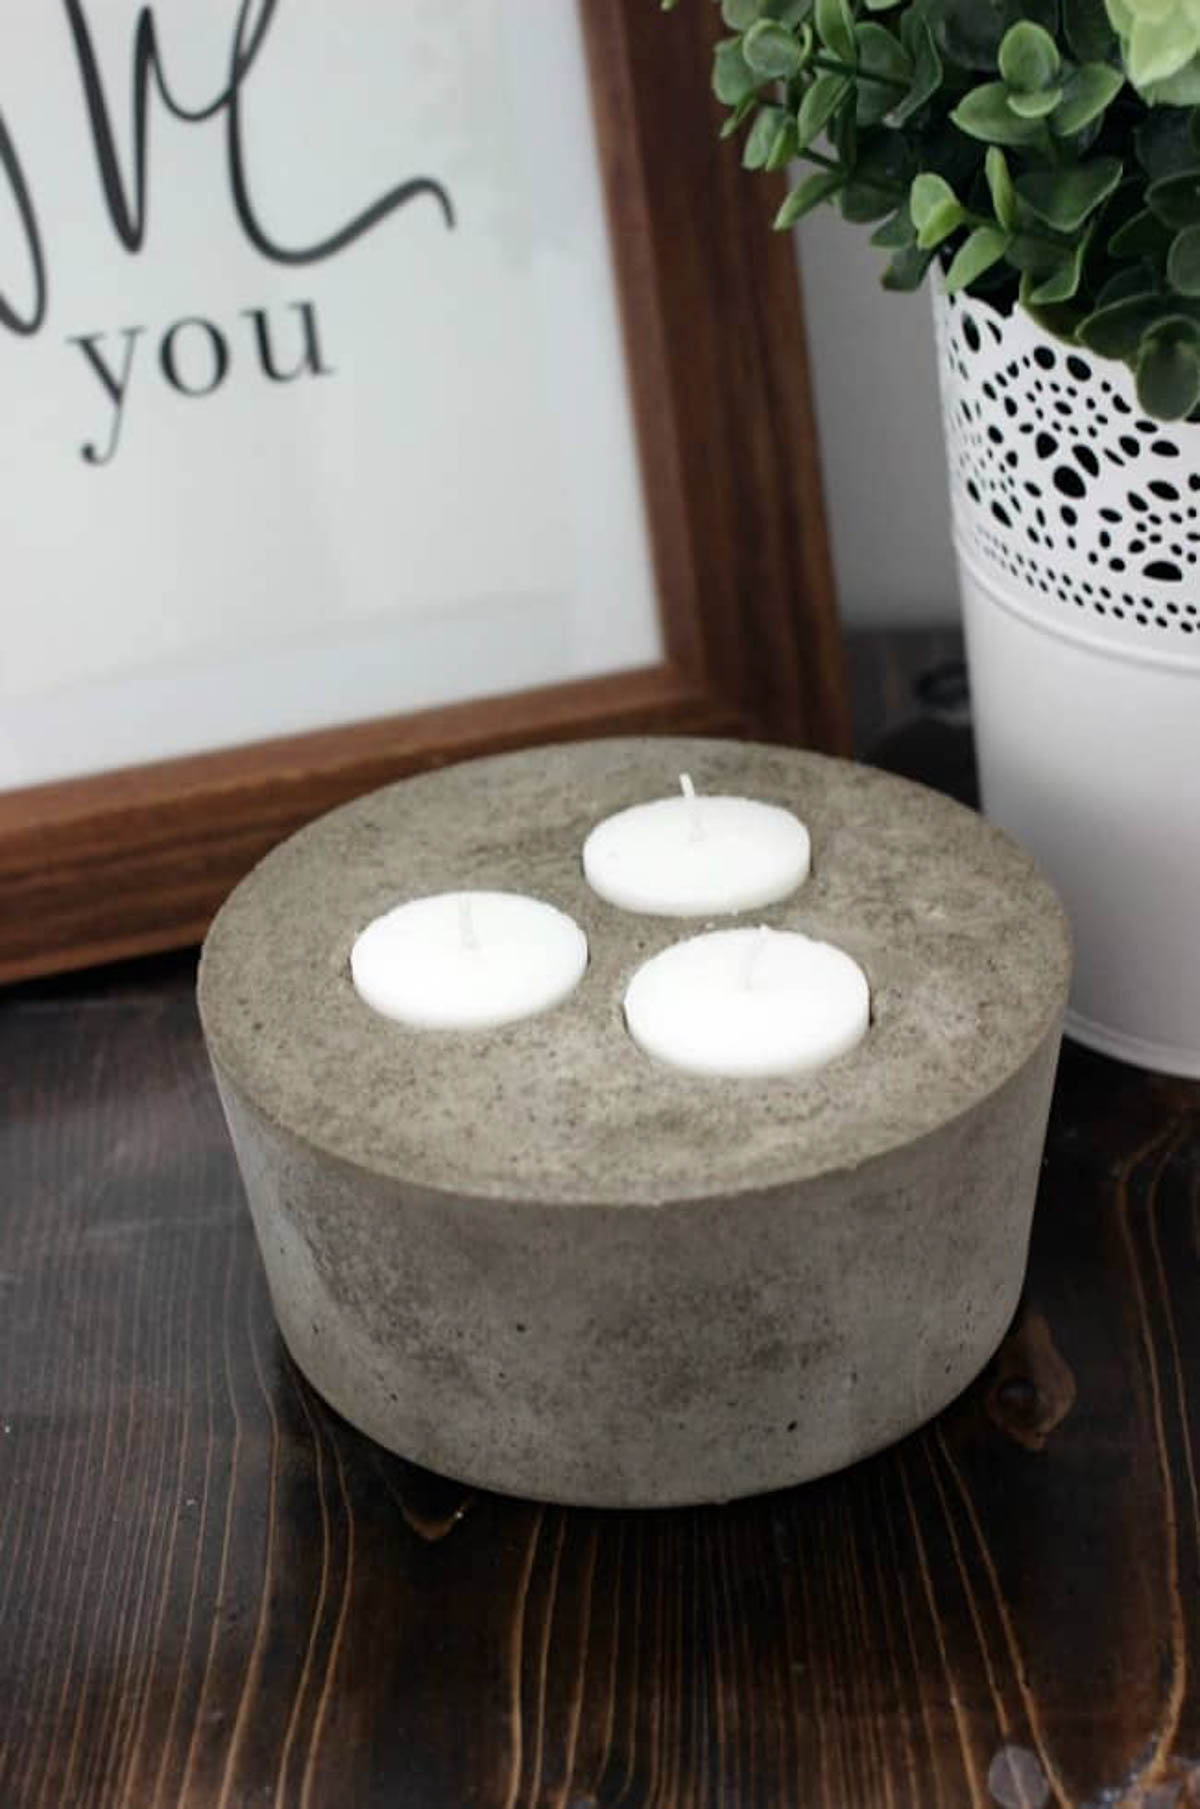 Concrete candle holder with tea light candles